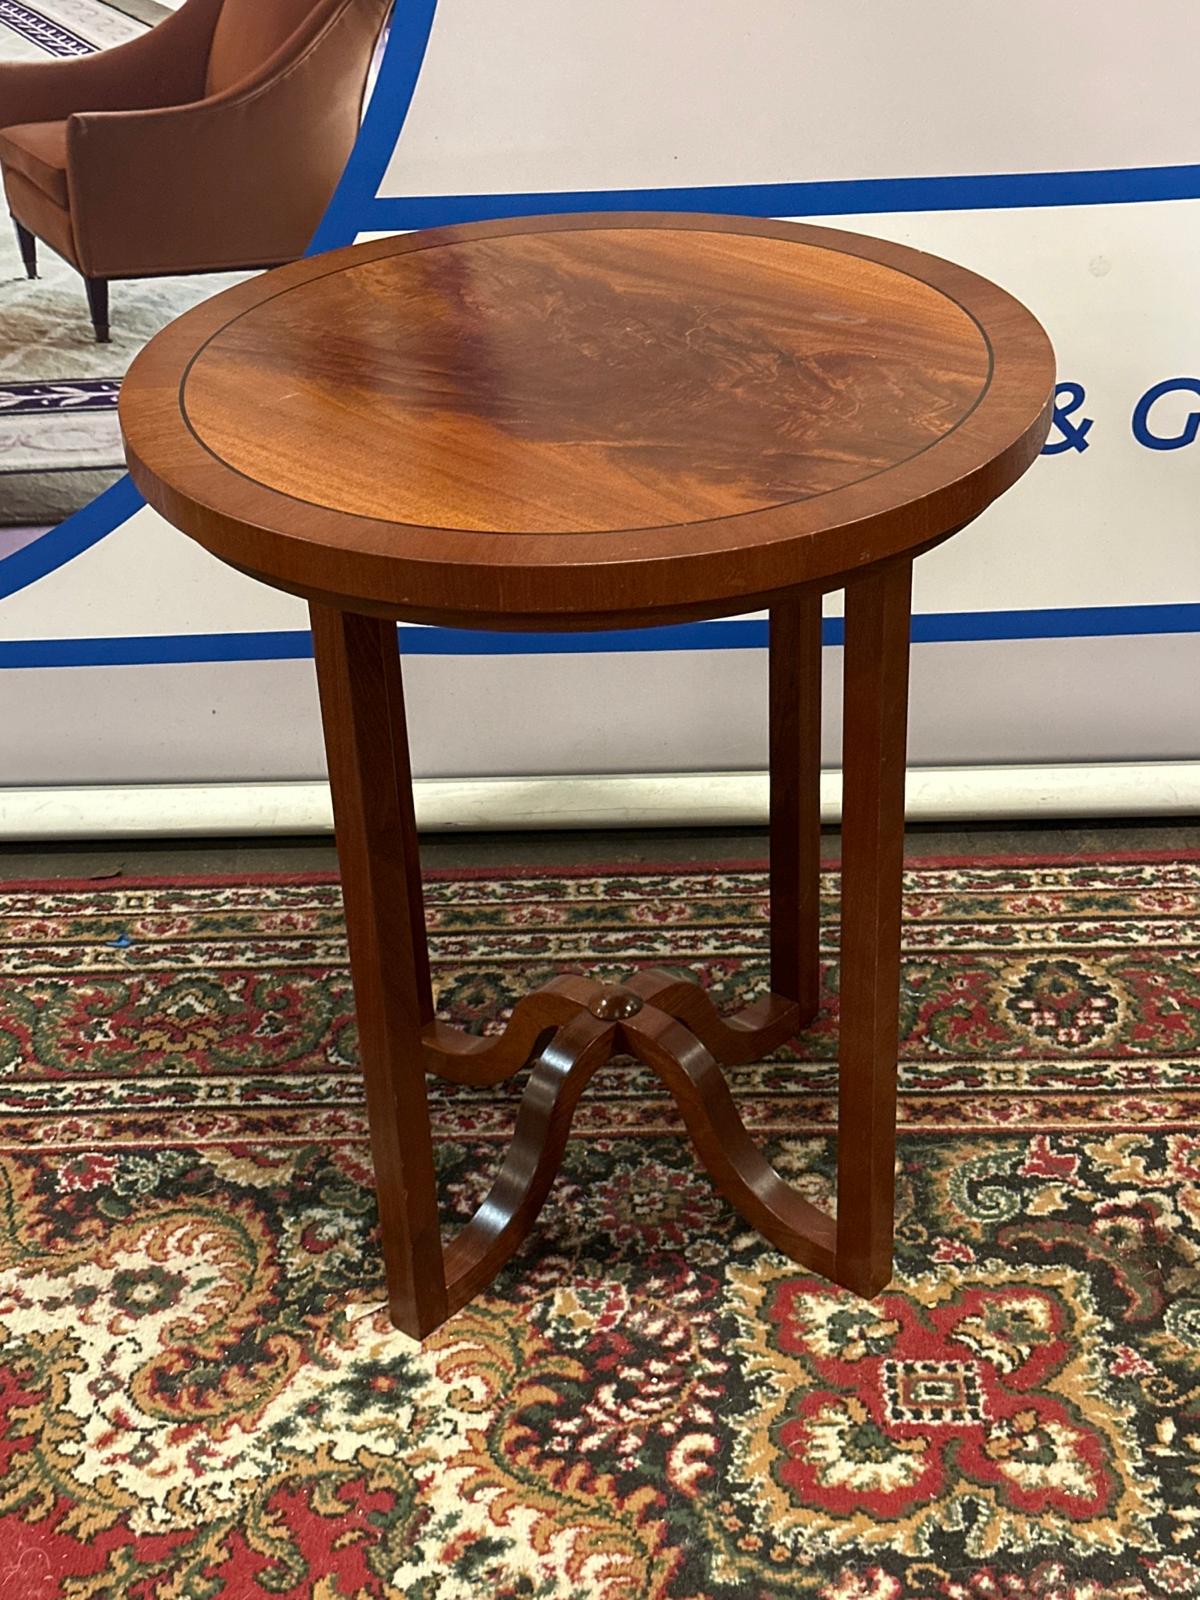 A Rosewood Art Deco Occasional Table Bespoke For The Mandarin Oriental Hotel London 60 x 58cm